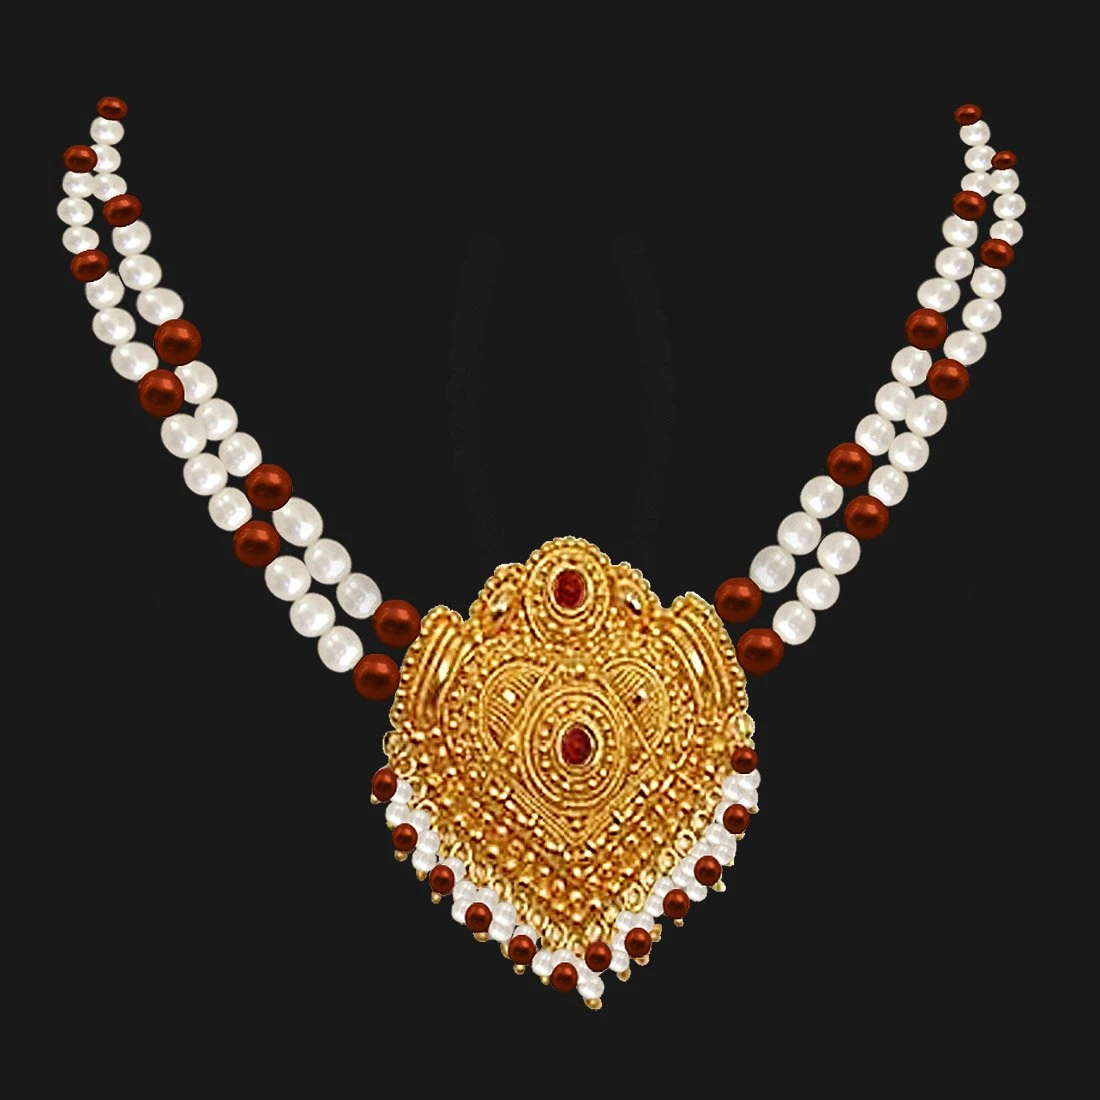 Ornate Beauty - Gold Plated Temple Design Pendant & 2 Line Freshwater Pearl & Tiger Eye Beads Necklace for Women (SNP2)